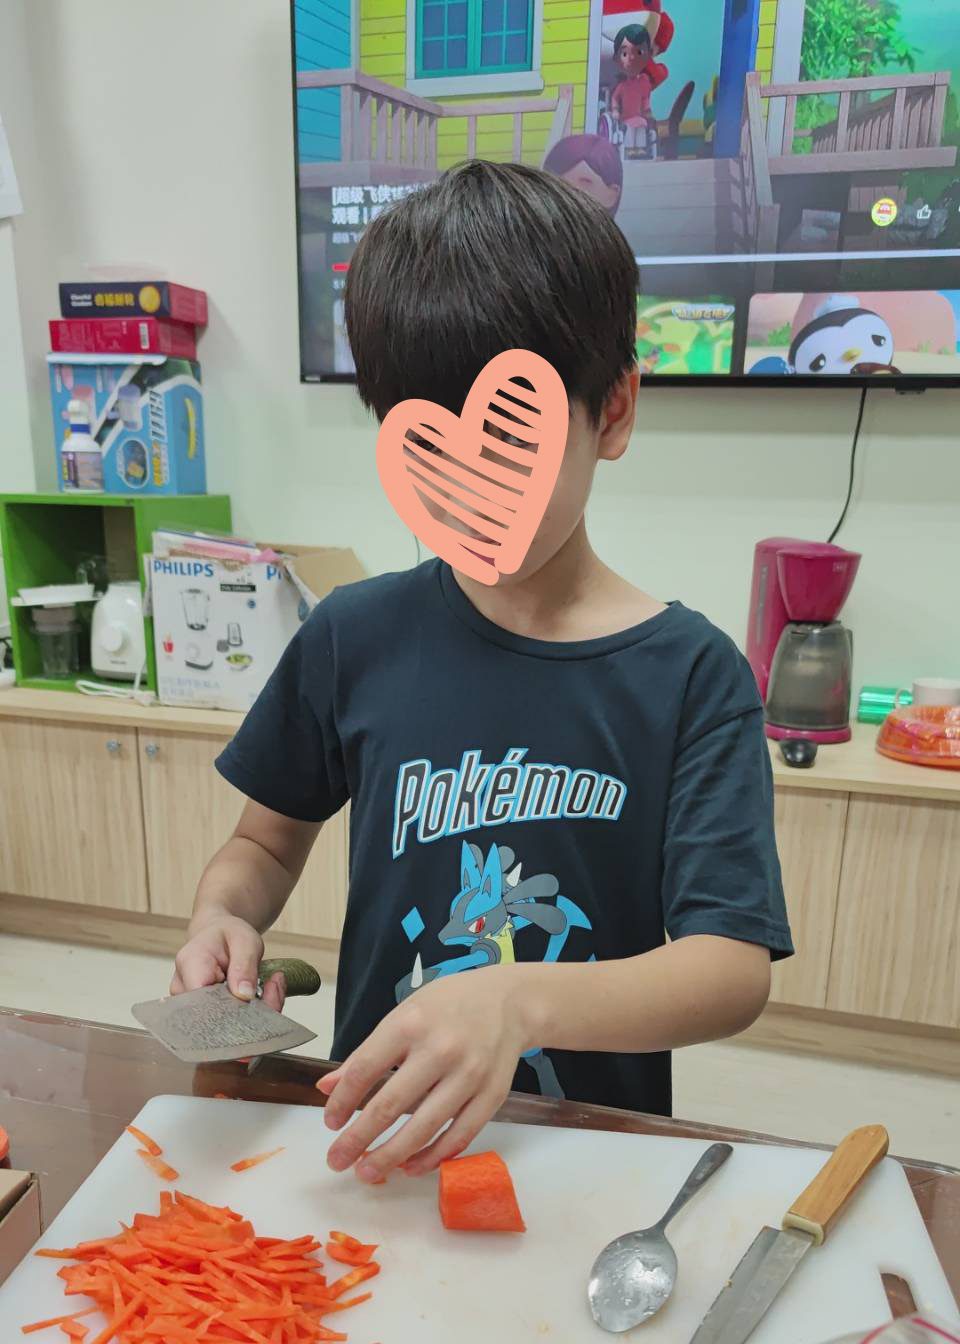 Young boy in Pokemon t-shirt chops food in the kitchen